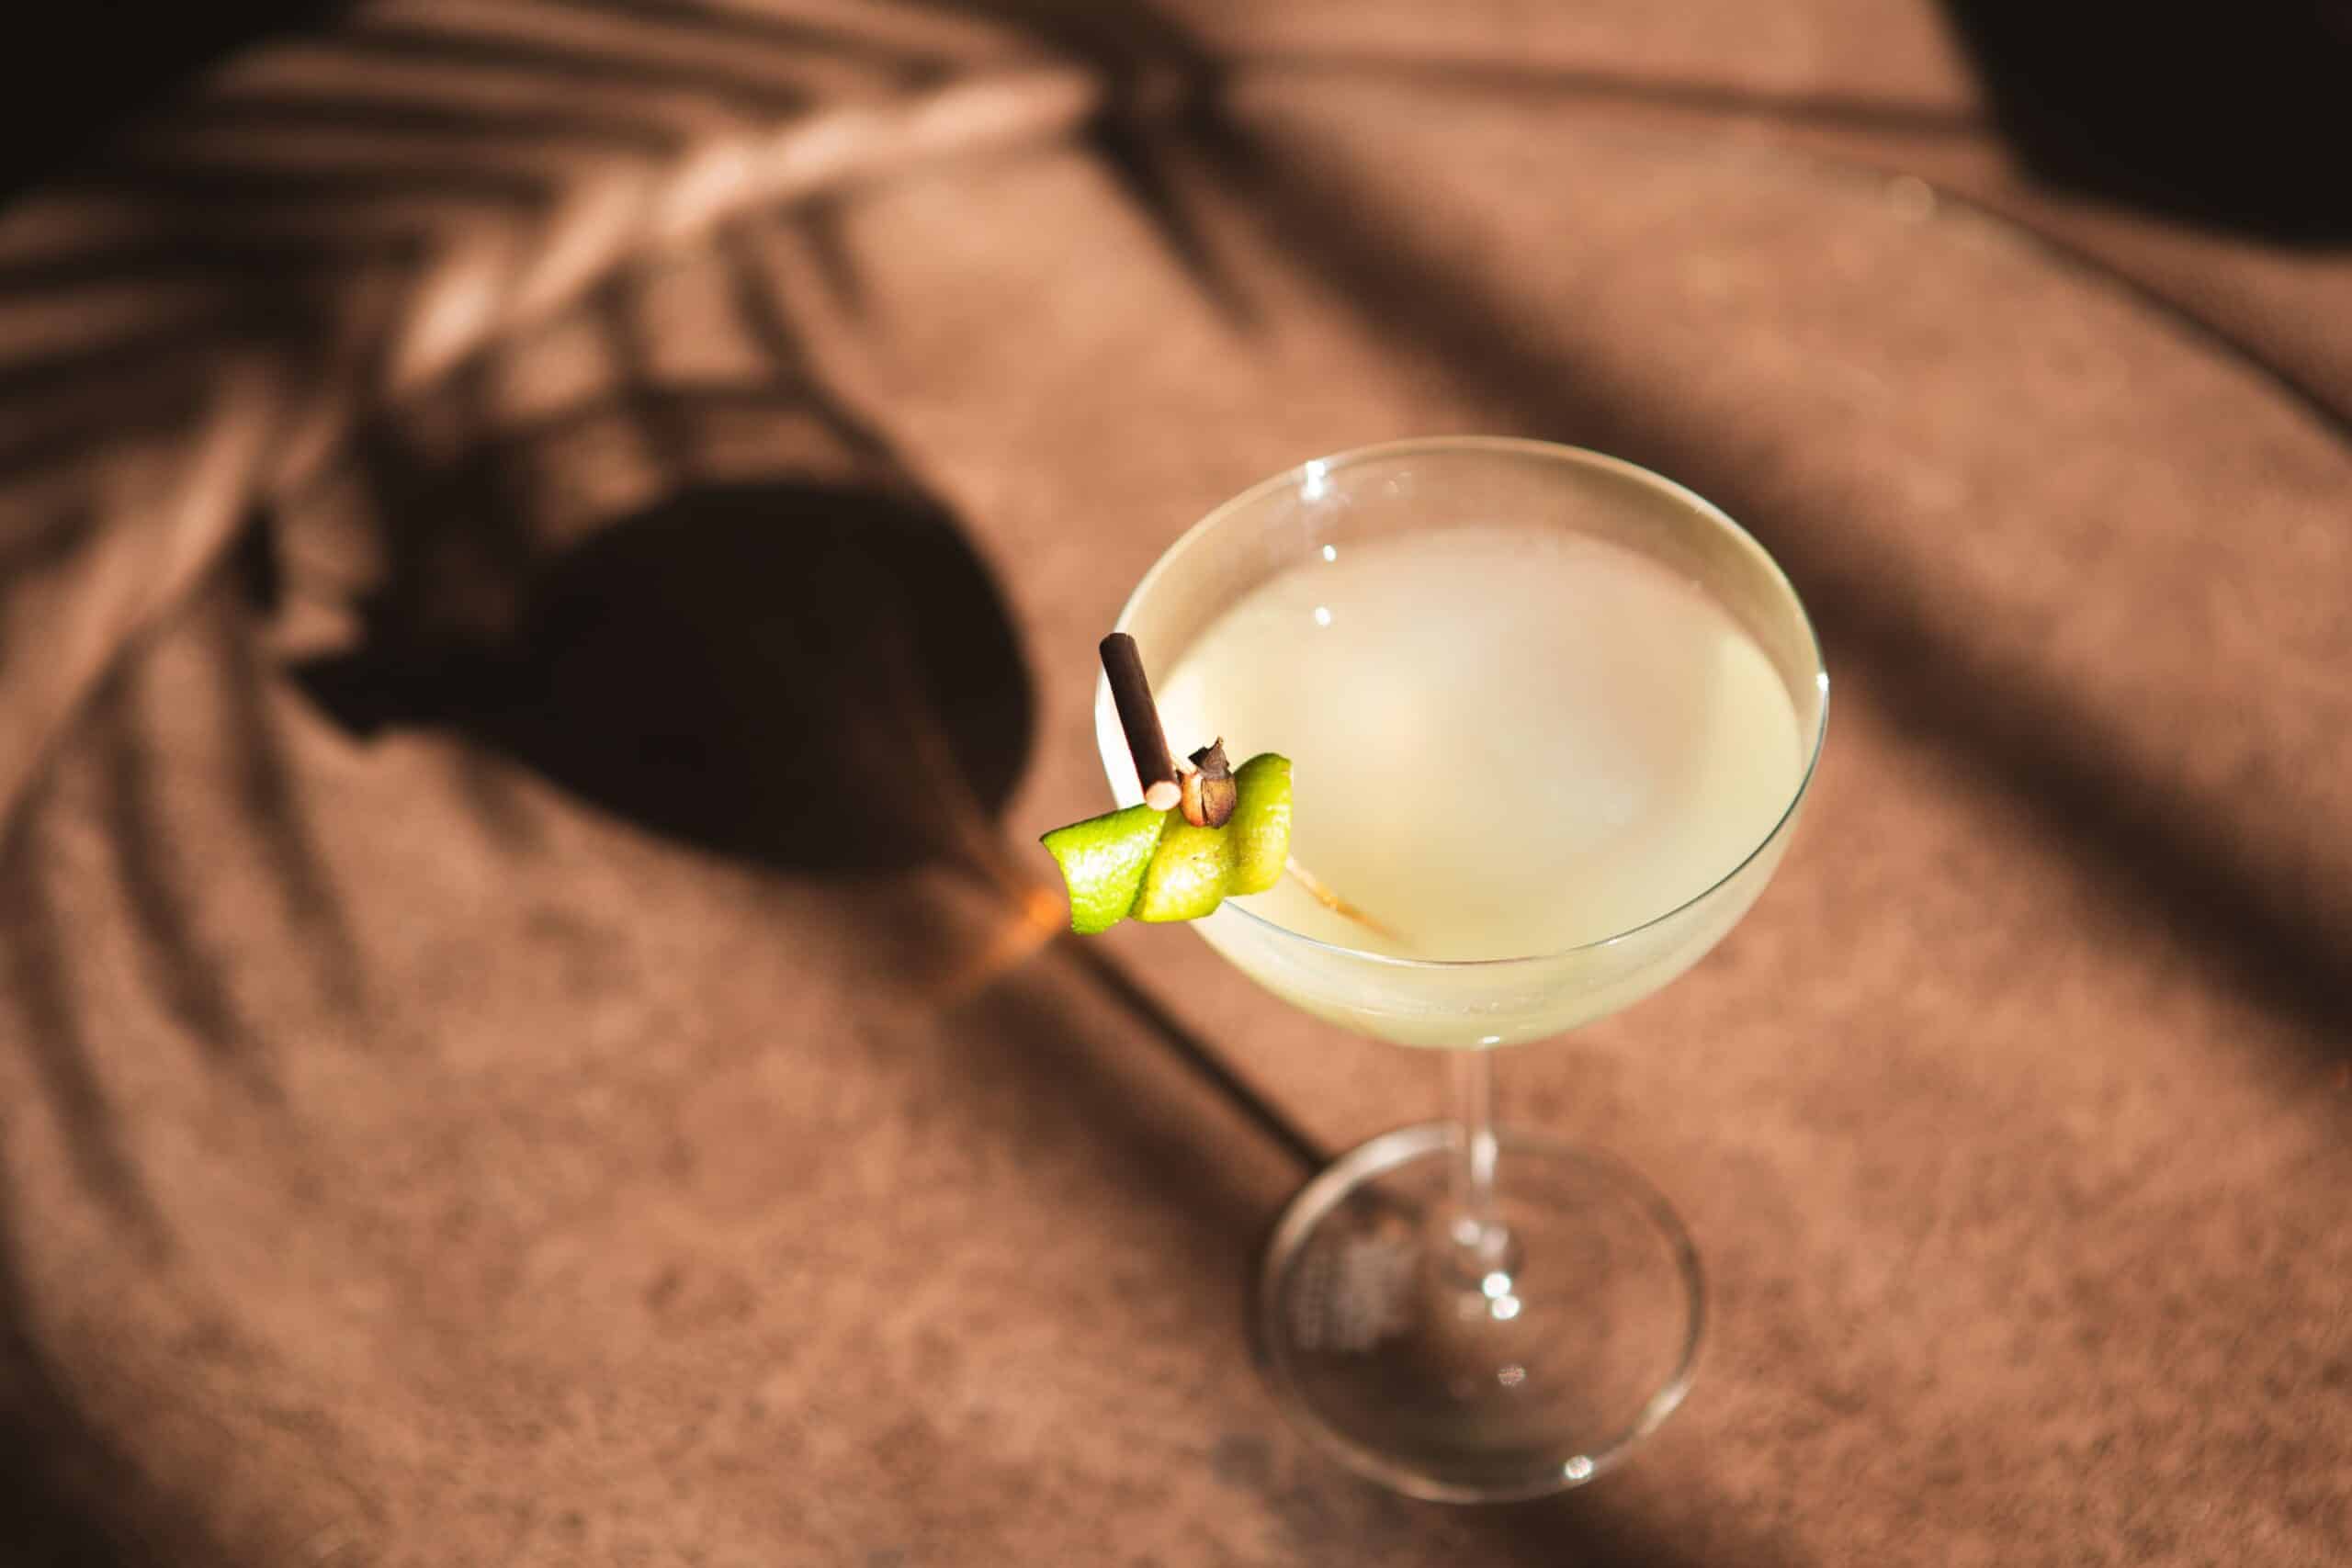 Sip, Mix, and Sparkle: Crafting Prodolce Cocktails for Sweet Moments